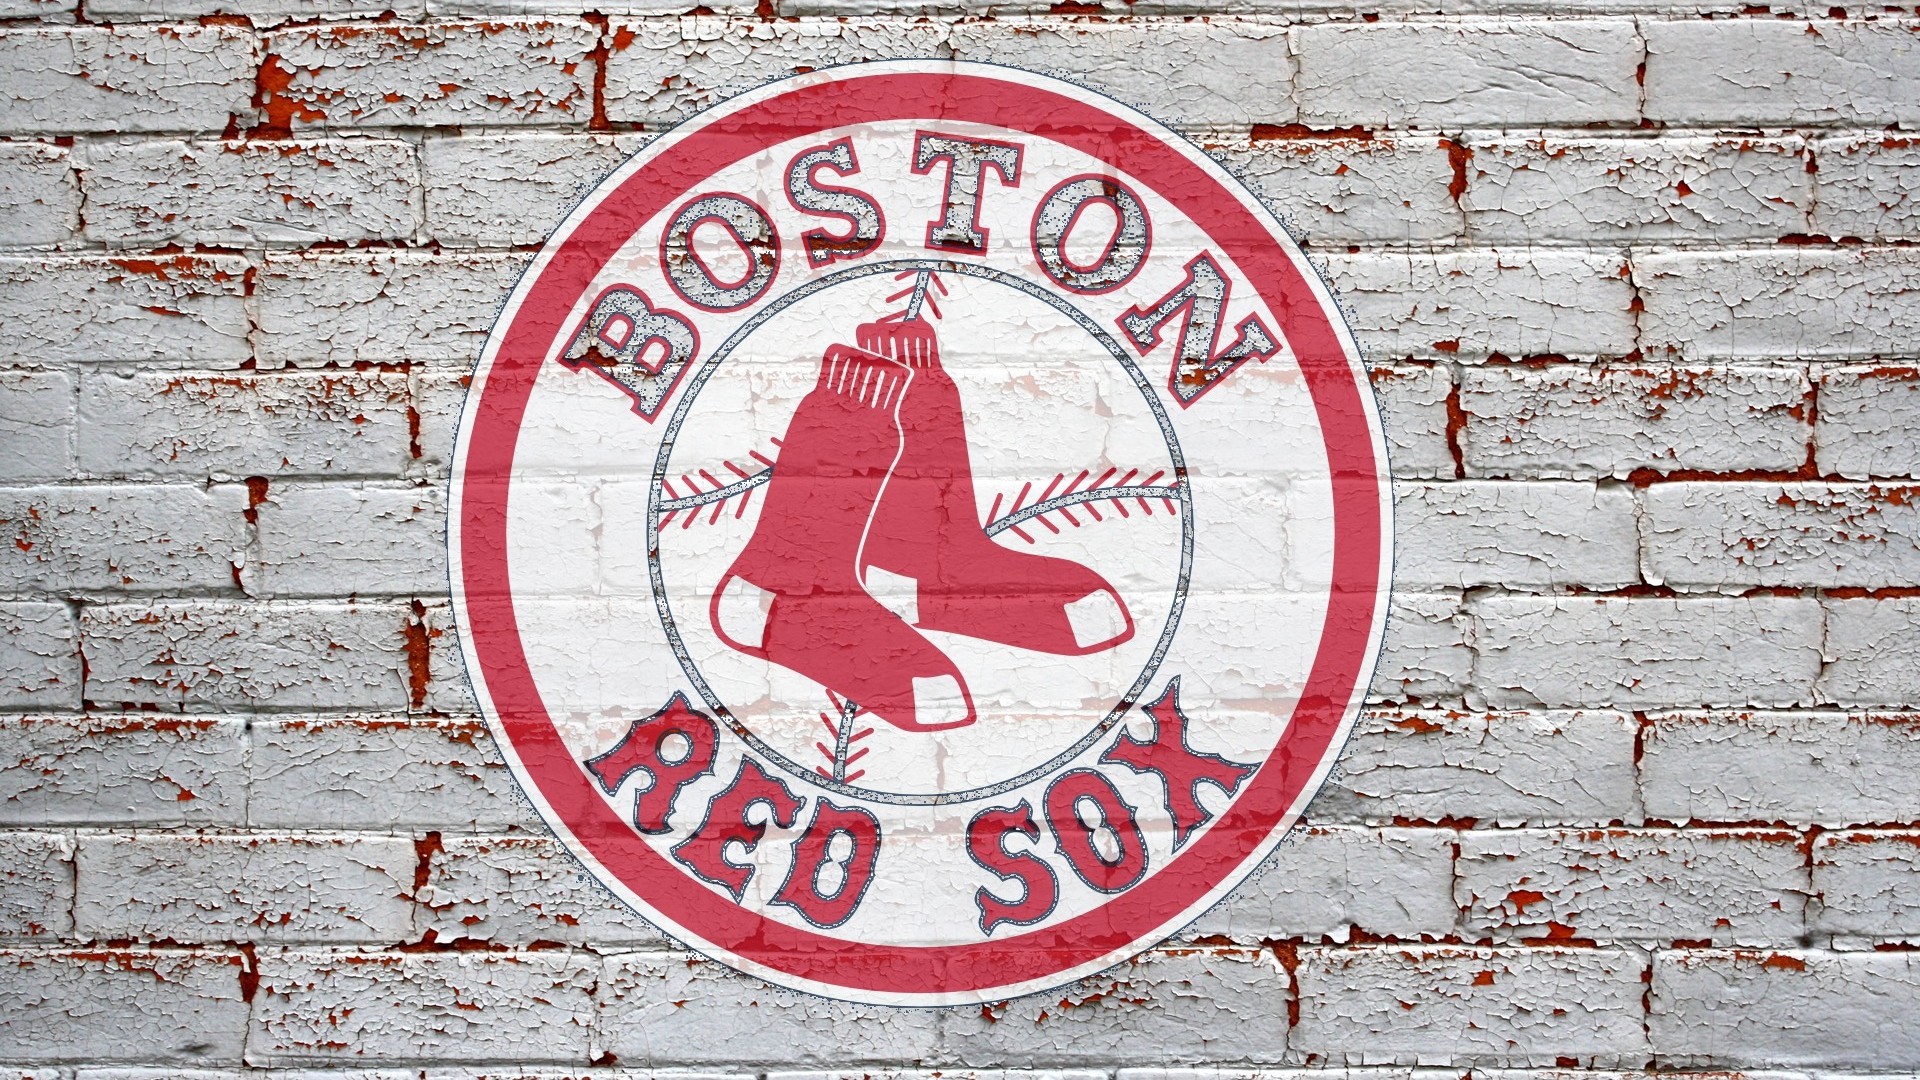 Boston Red Sox Laptop Wallpaper with high-resolution 1920x1080 pixel. You can use this wallpaper for Mac Desktop Wallpaper, Laptop Screensavers, Android Wallpapers, Tablet or iPhone Home Screen and another mobile phone device